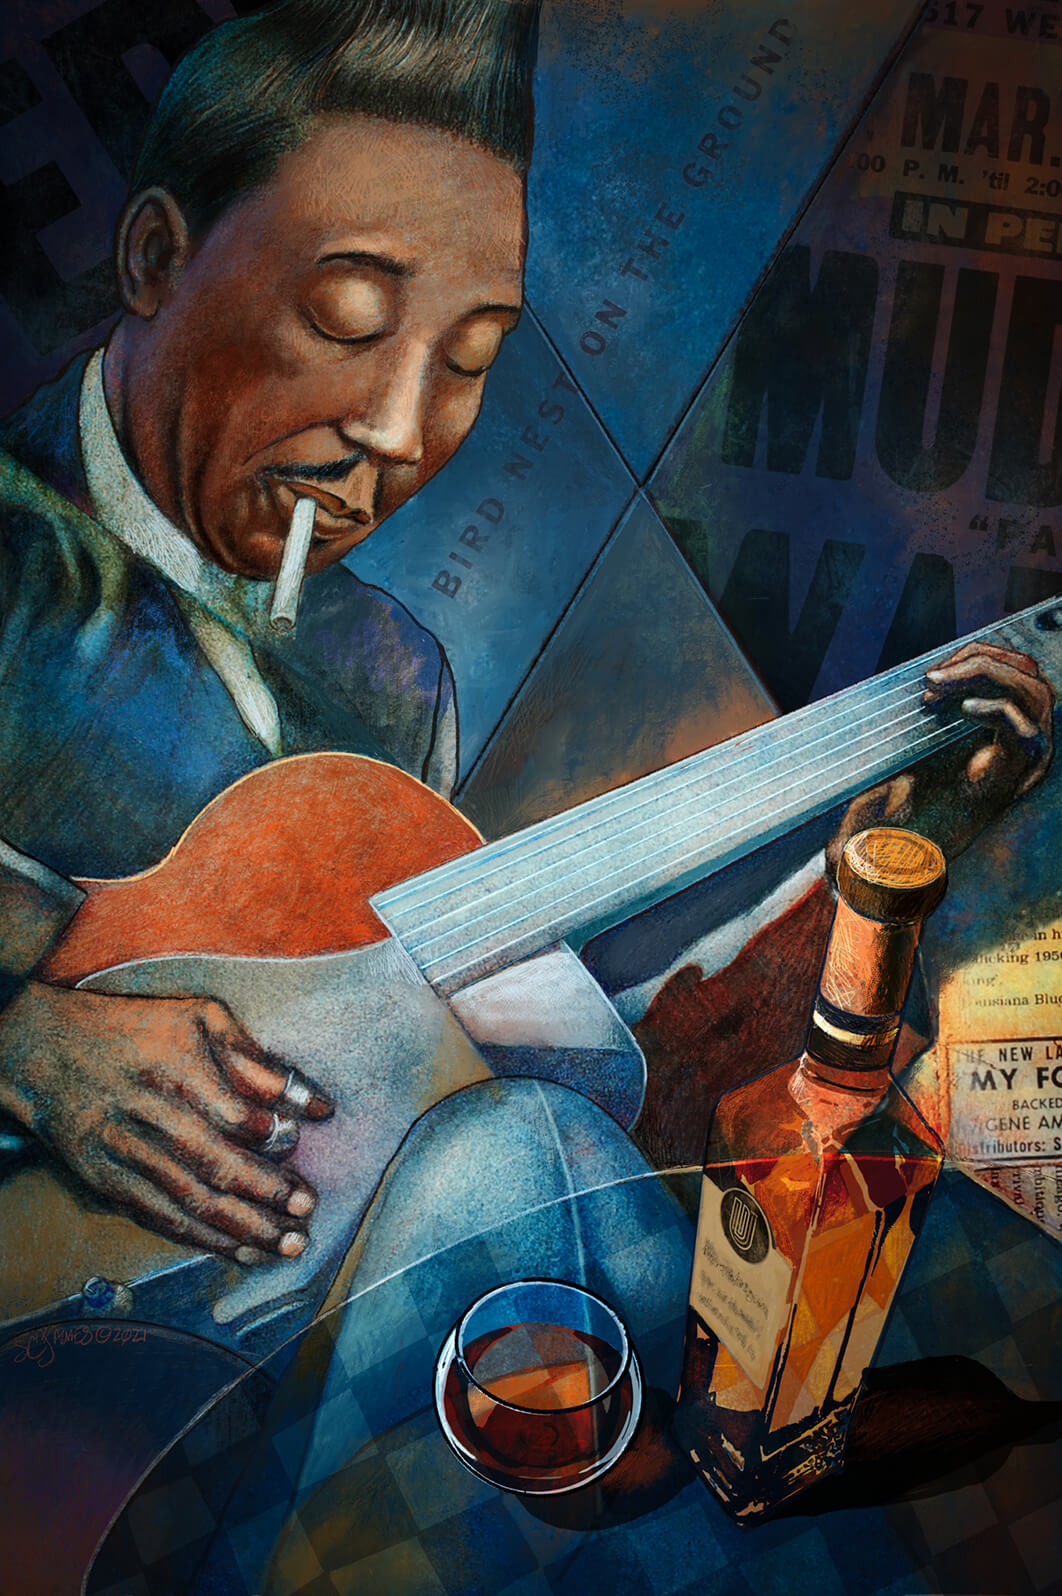 Cubist collage Image of Muddy Waters by S. C. James